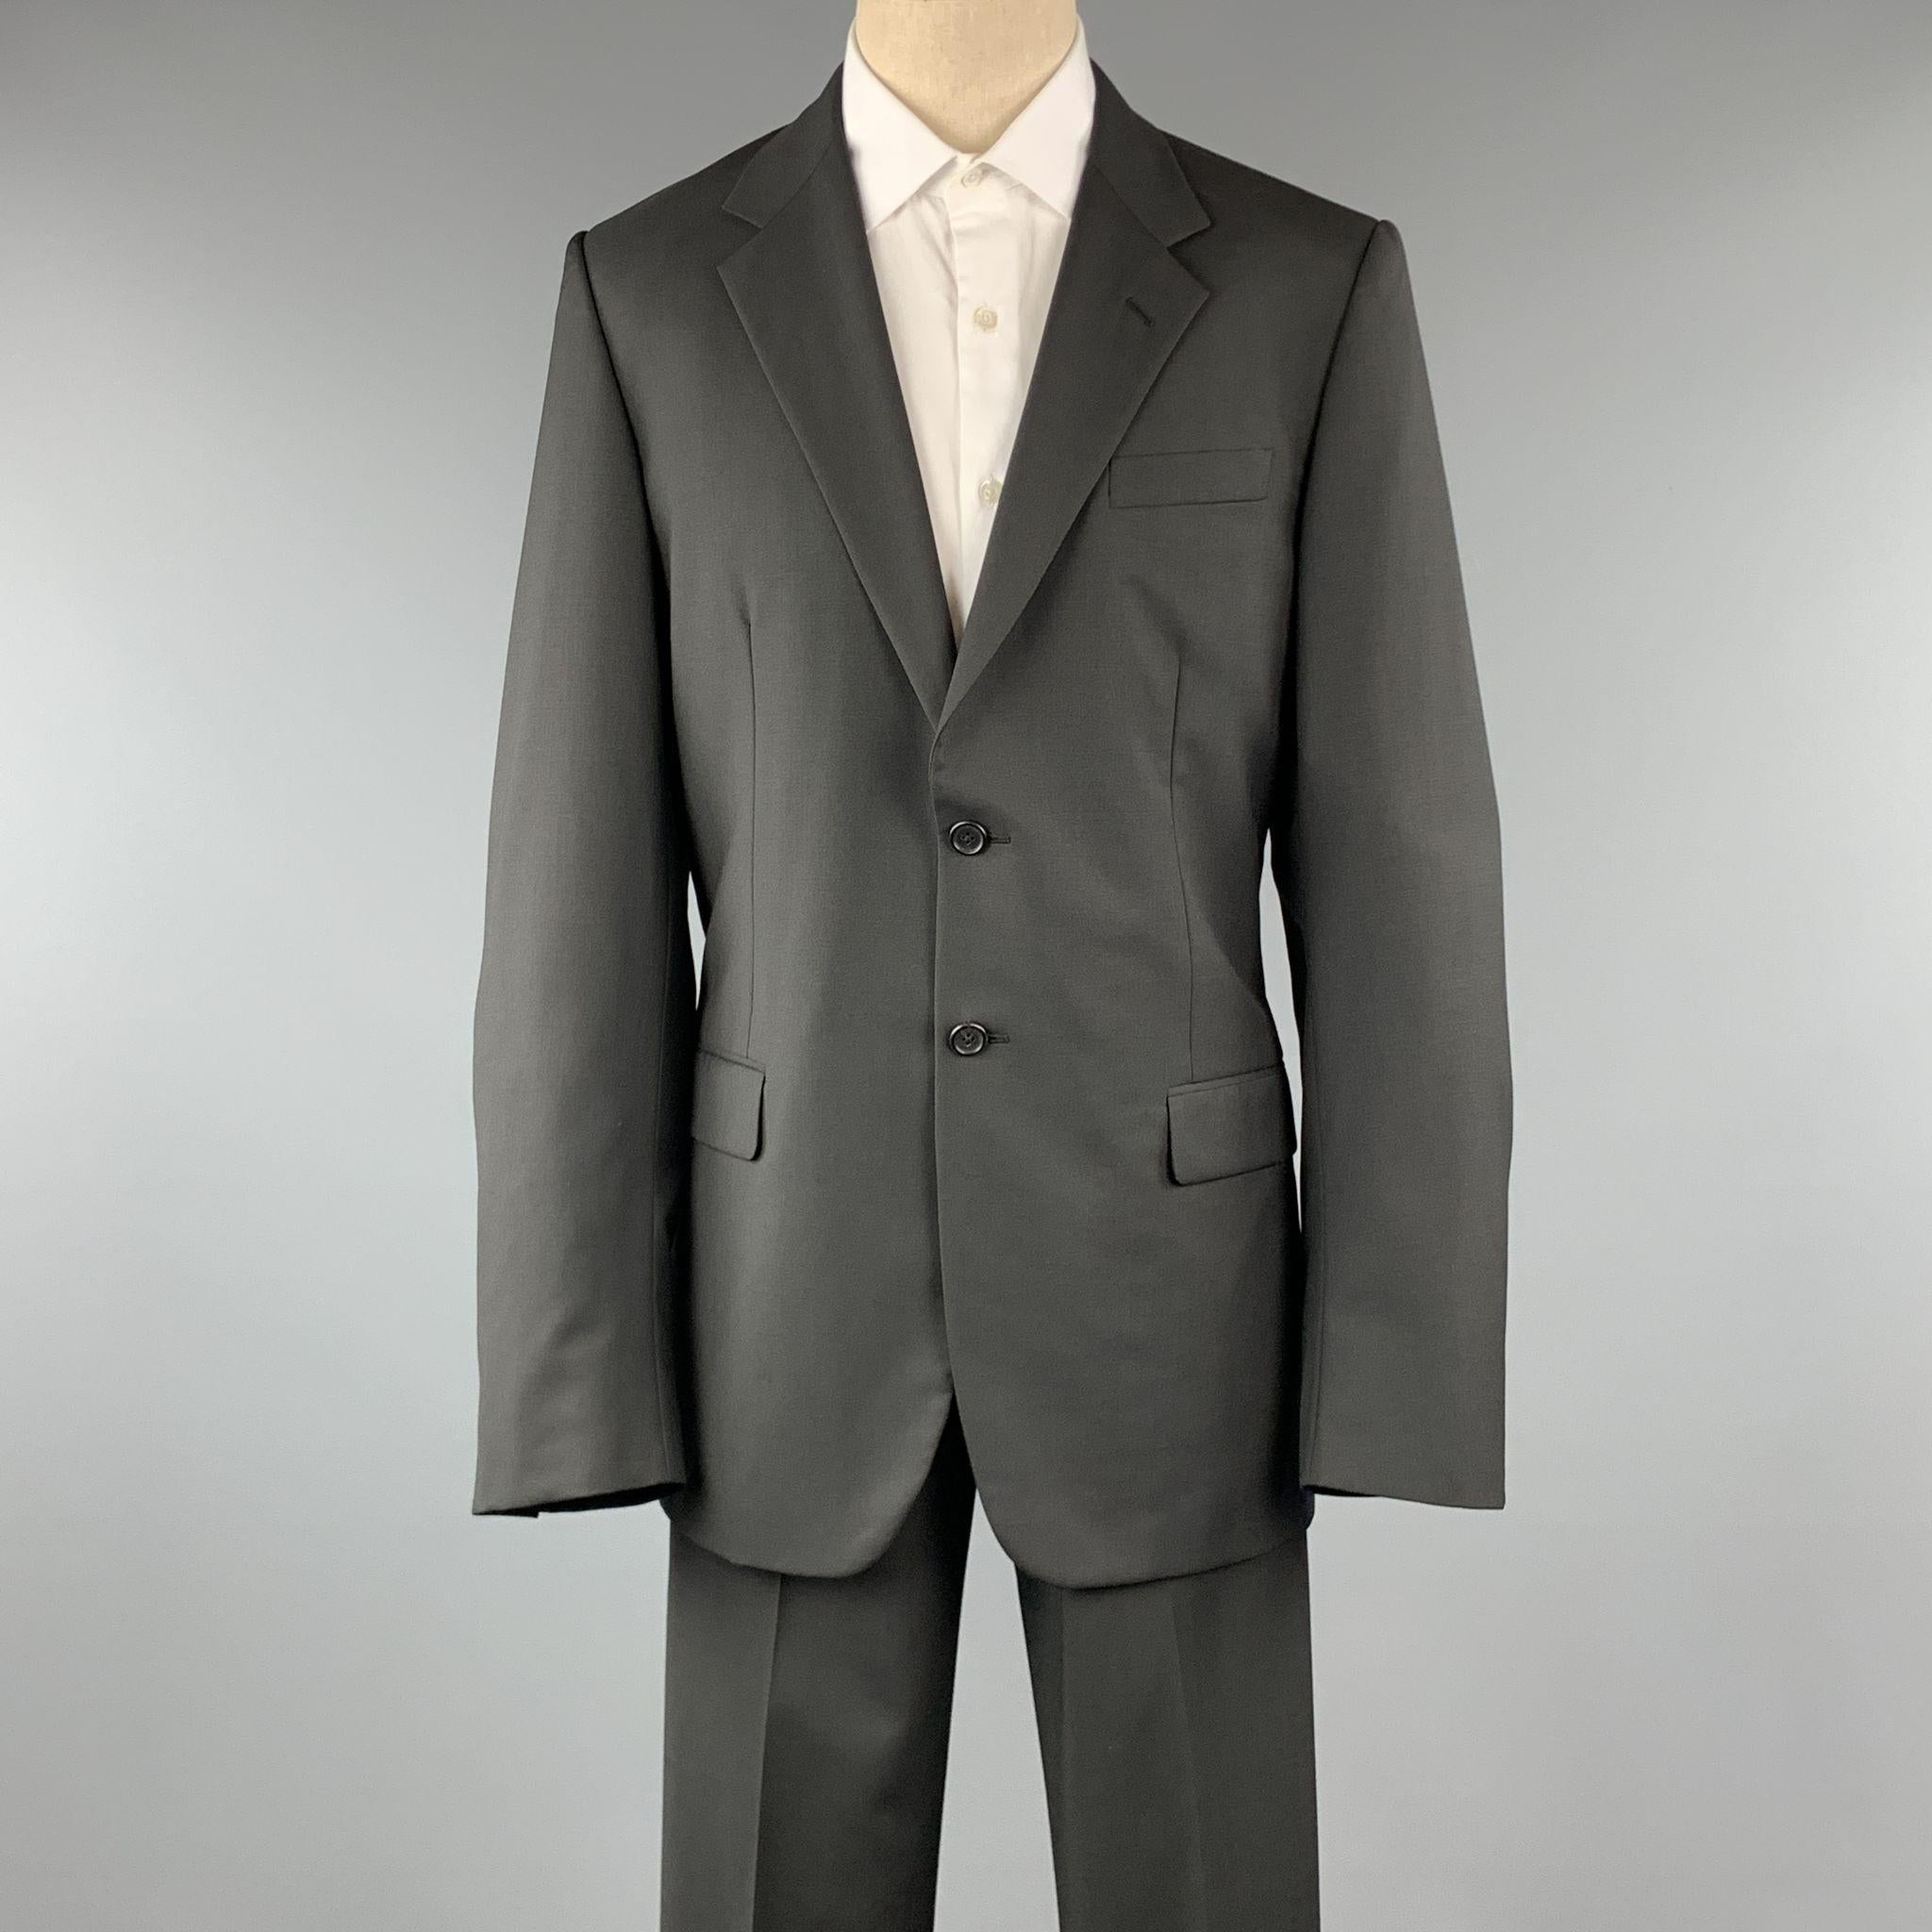 PRADA suit comes in a black wool / mohair and includes a single breasted, 2 button sport coat with a notch lapel and matching front trousers. Made in Italy.

Excellent Pre-Owned Condition.
Marked: 52 L

Measurements:

-Jacket
Shoulder: 19 in.
Chest: